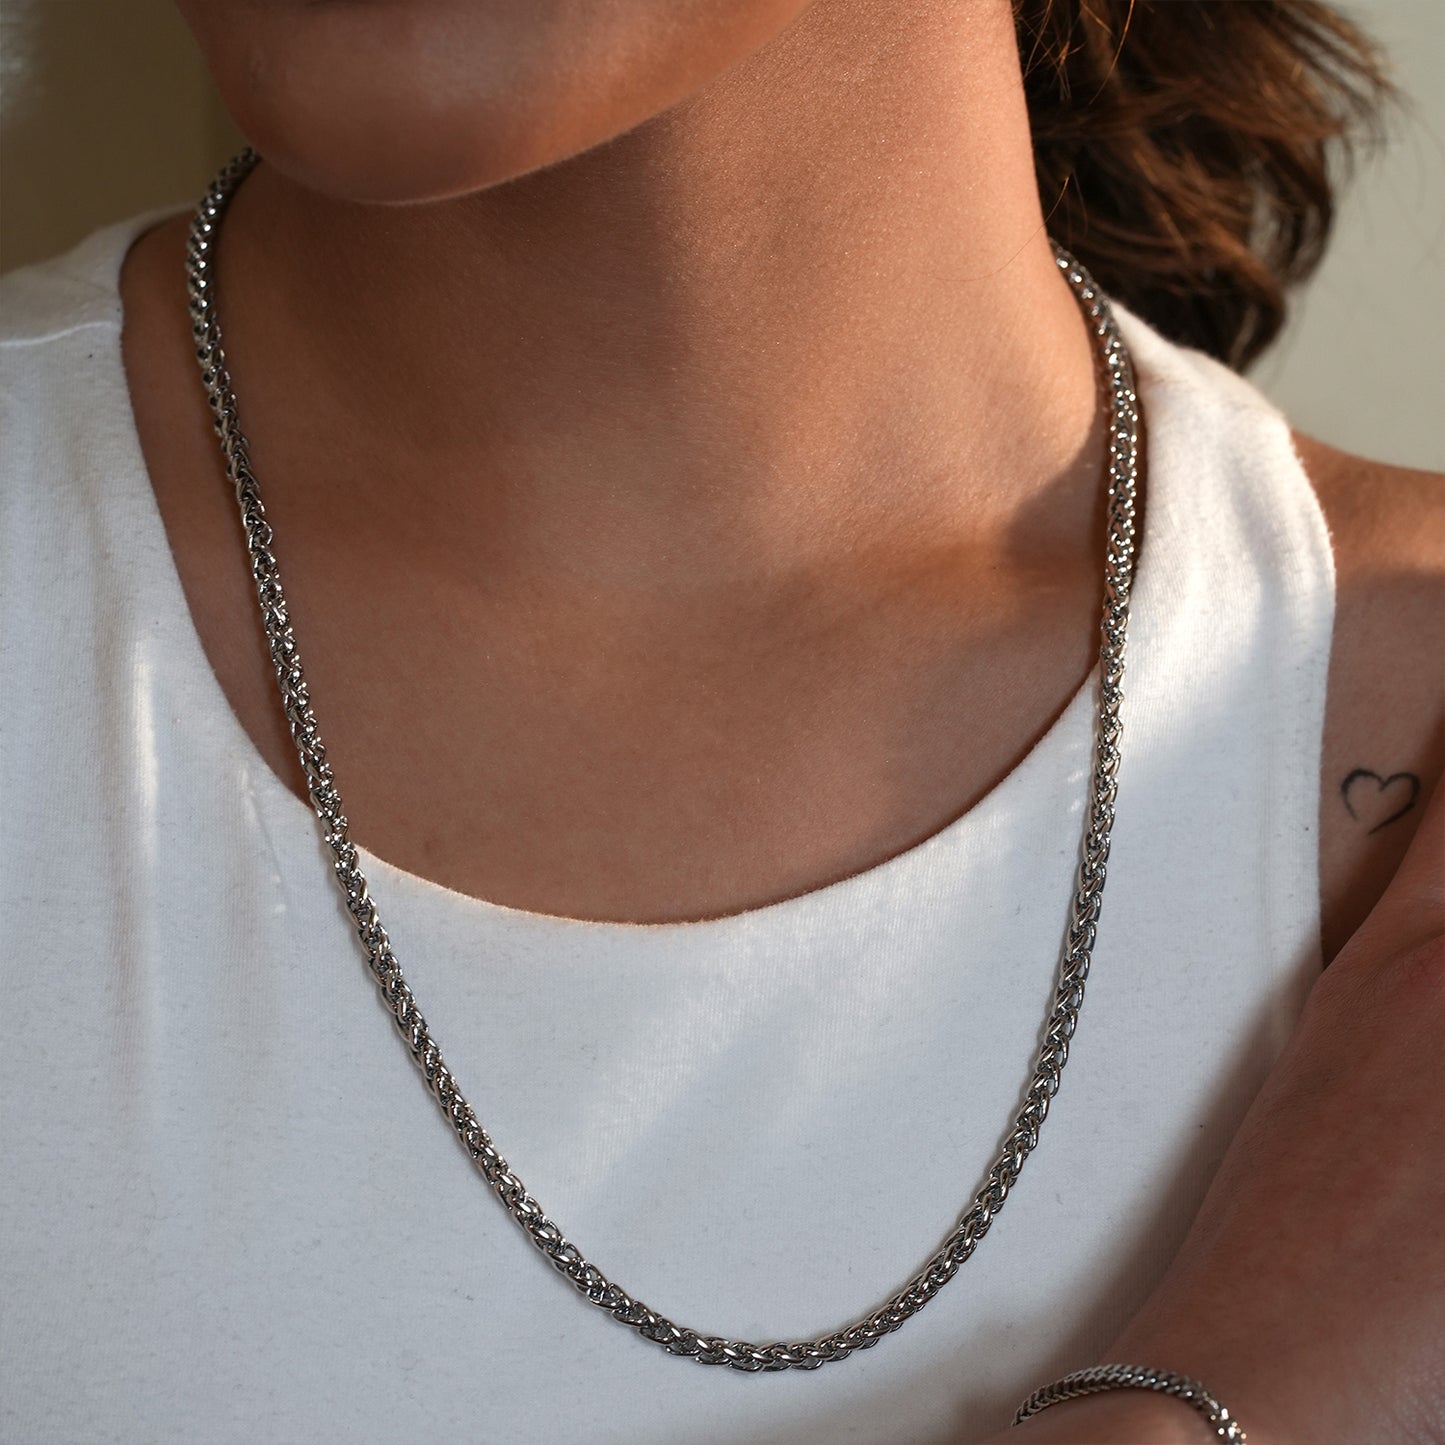 Style ALGATE: Bold Elegance - Chunky Mid-Width Byzantine Chain Necklace in Silver.